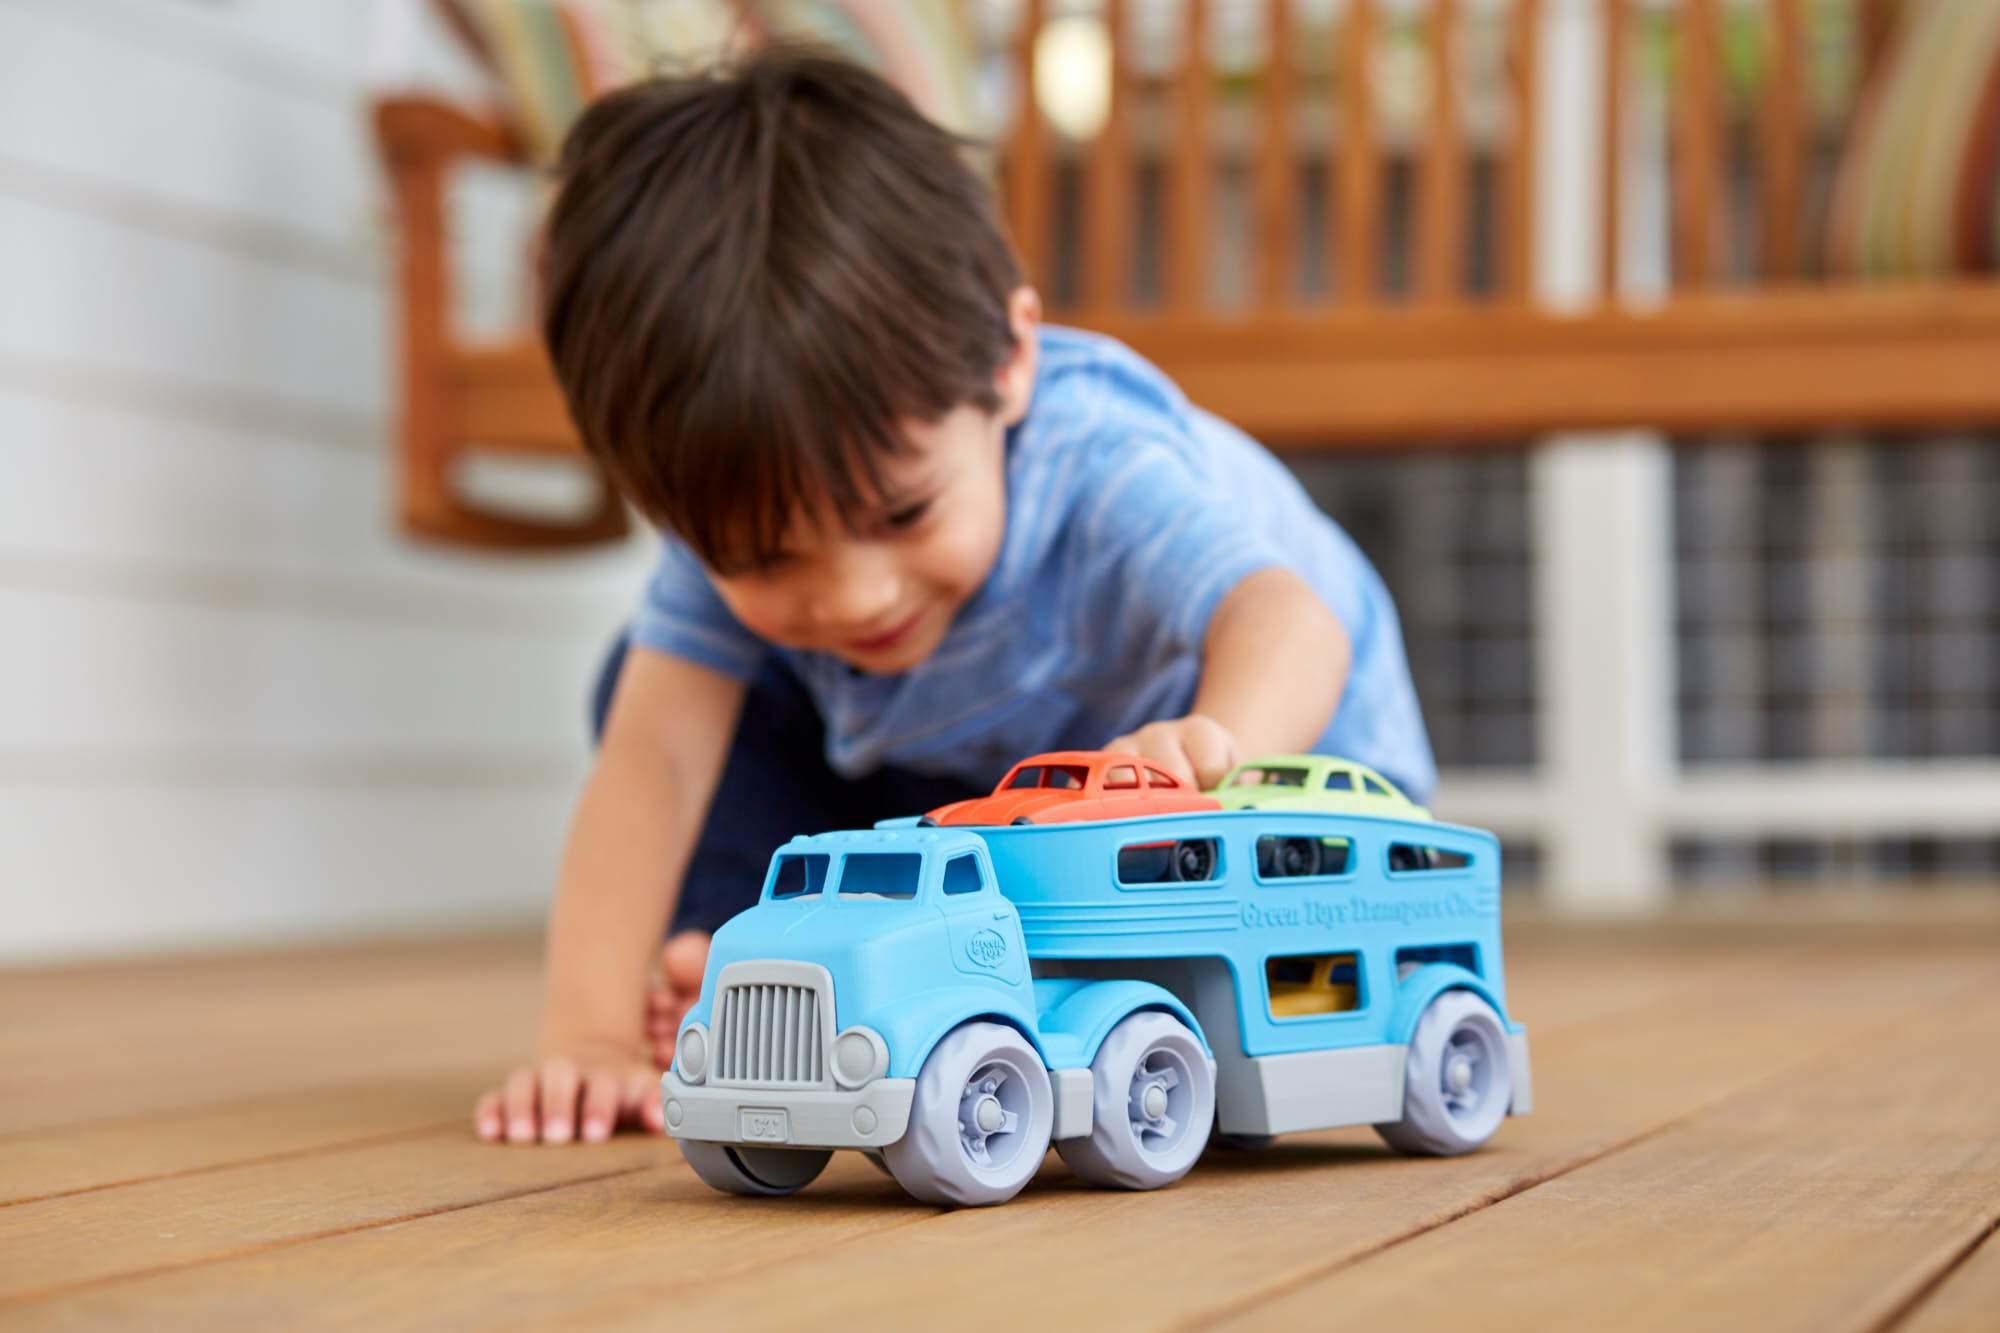 Green Toys Car Transporter made from recycled plastic